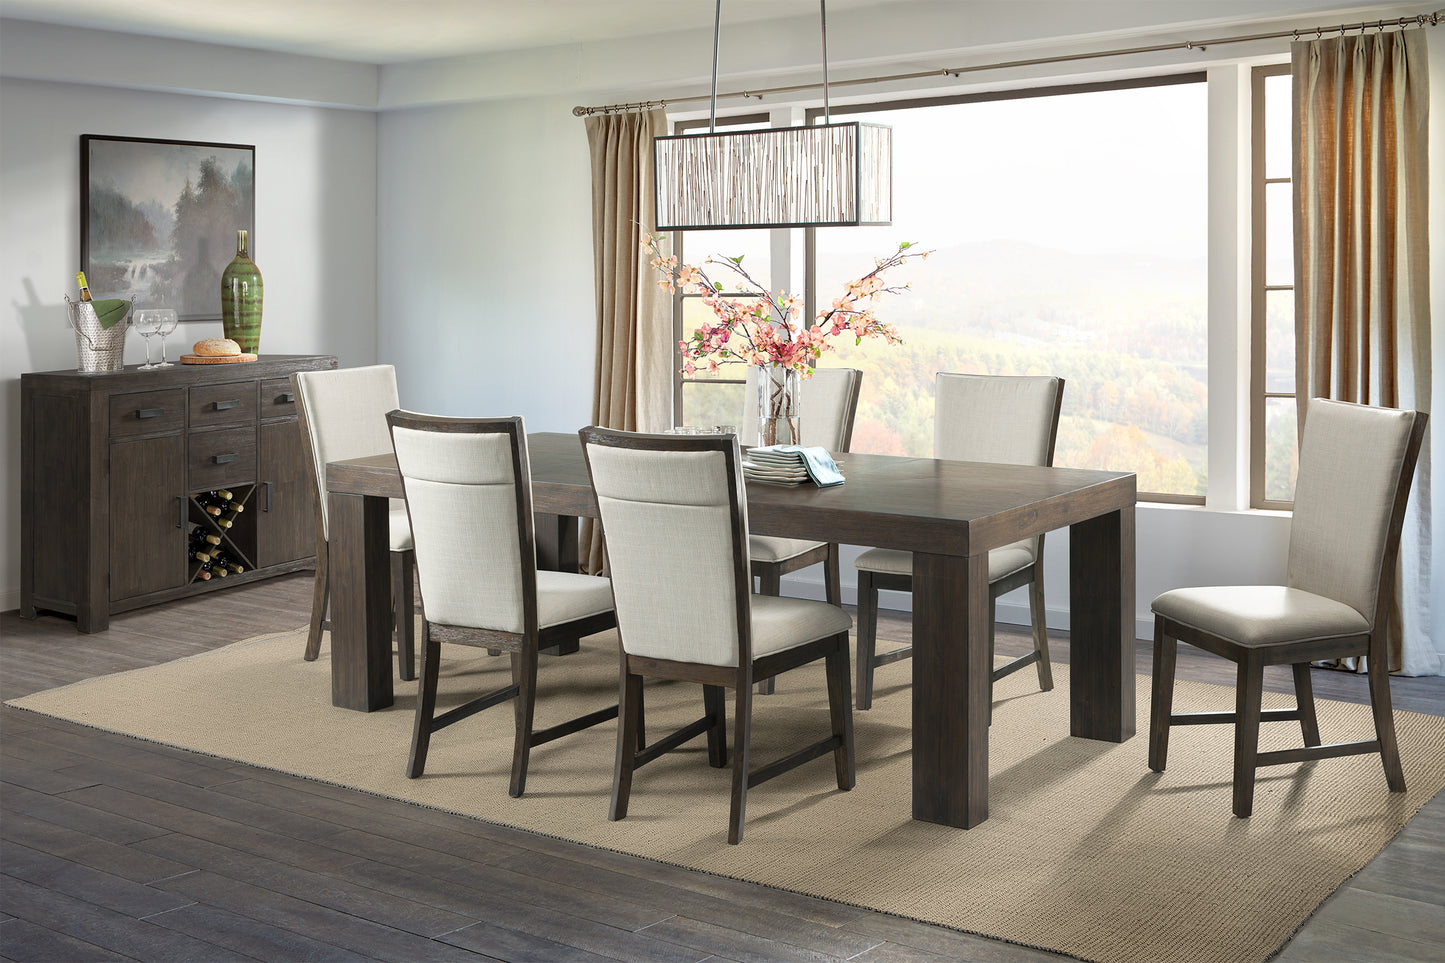 Grady 5 Piece Dining Set with Upholstered Back Chair